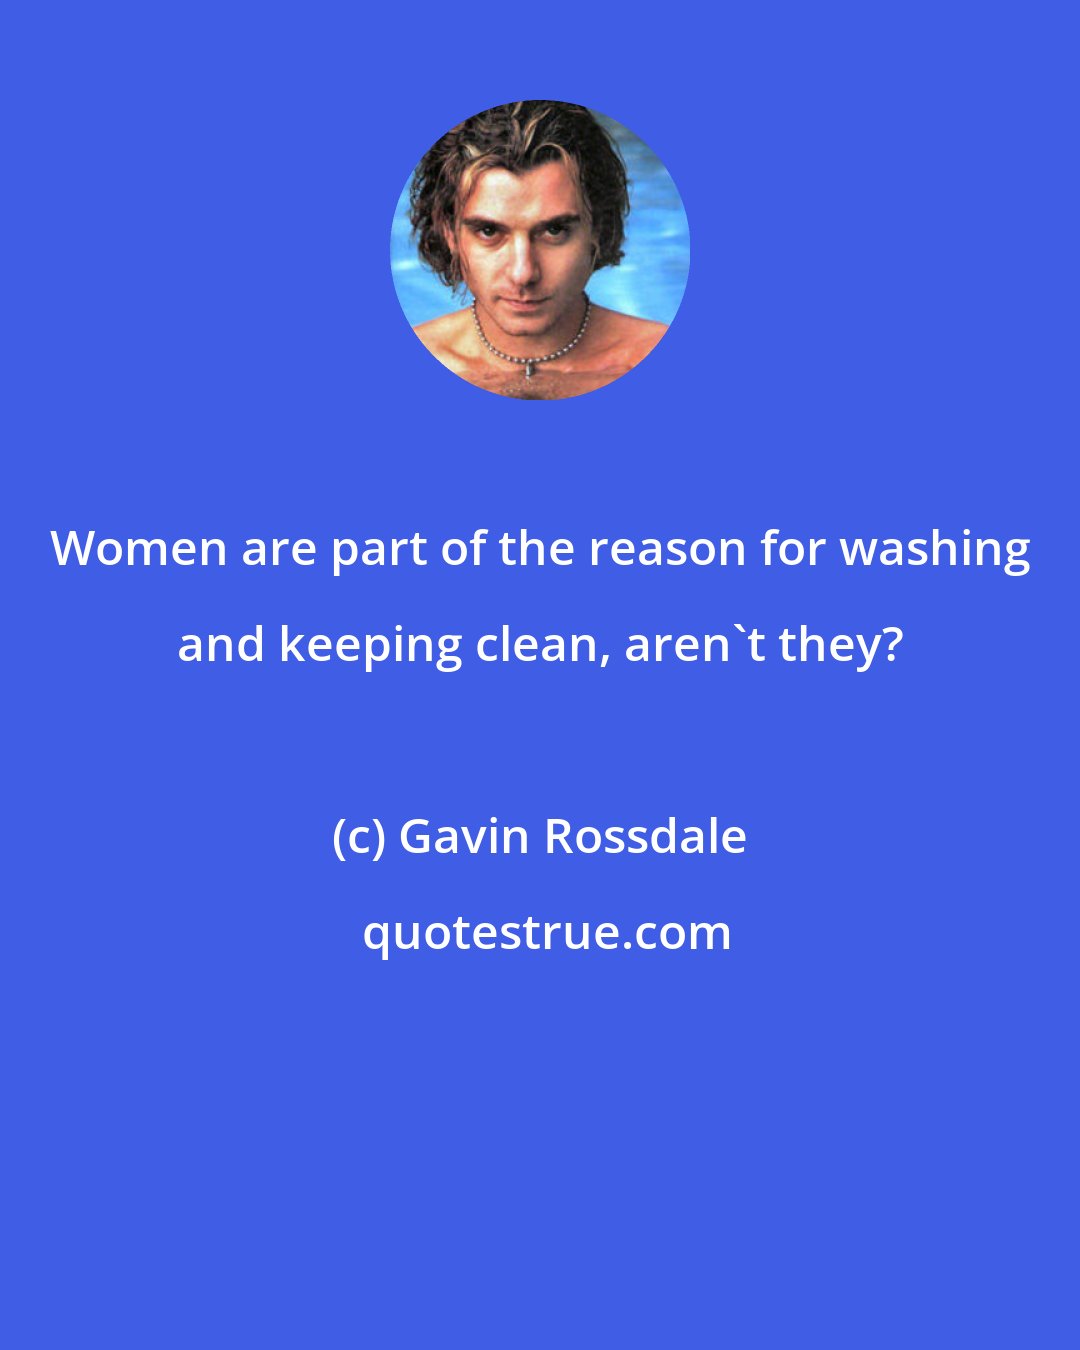 Gavin Rossdale: Women are part of the reason for washing and keeping clean, aren't they?